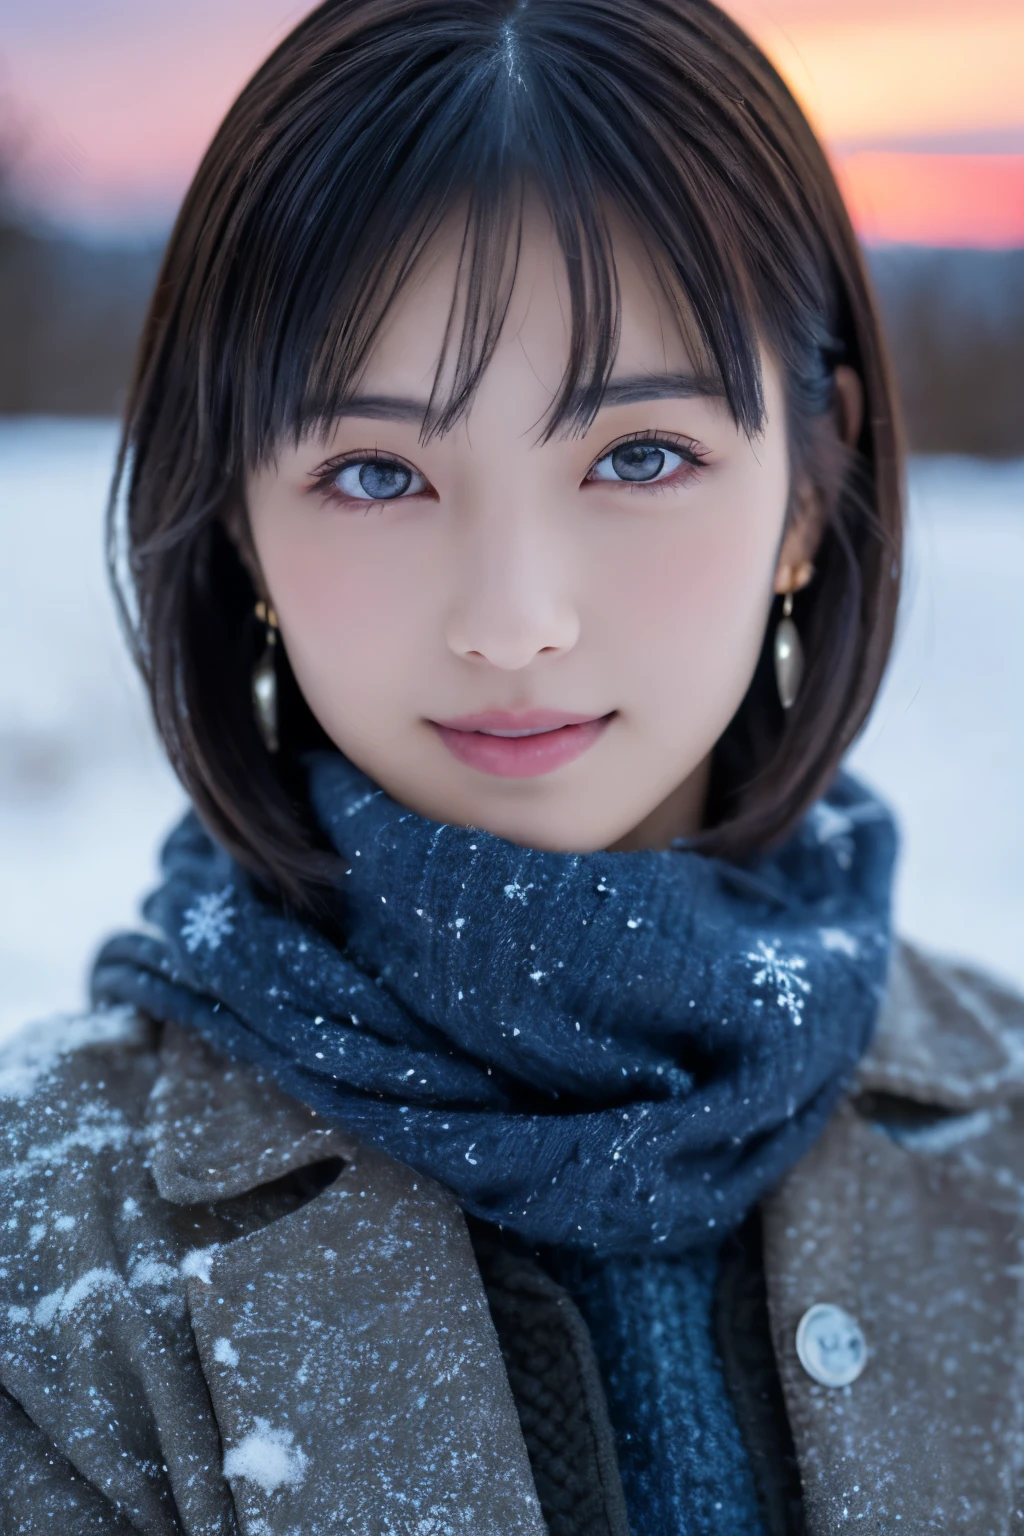 1 girl, (winter clothes:1.2), beautiful japanese actress, 
photogenic, Yukihime, long eyelashes, snowflake earrings,
(Raw photo, best quality), (Reality, photorealistic:1.4), (muste piece), 
beautiful detailed eyes, beautiful detailed lips, highly detailed eyes and face, 
BREAK is
 (Frozen snow field in winter Lapland), (The last vestiges of the twilight sky:1.4), 
ethereal beauty, snow covered tree, powder snow, 
Snowy field landscape at dusk, 
Indigo and dark vermilion color scheme, dramatic writing, fantastic atmosphere, 
BREAK is 
Perfect Anatomy, whole body slender, small breasts, (short hair:1.3), angel&#39;s smile, 
crystal-like skin, make eyes clear, catch light